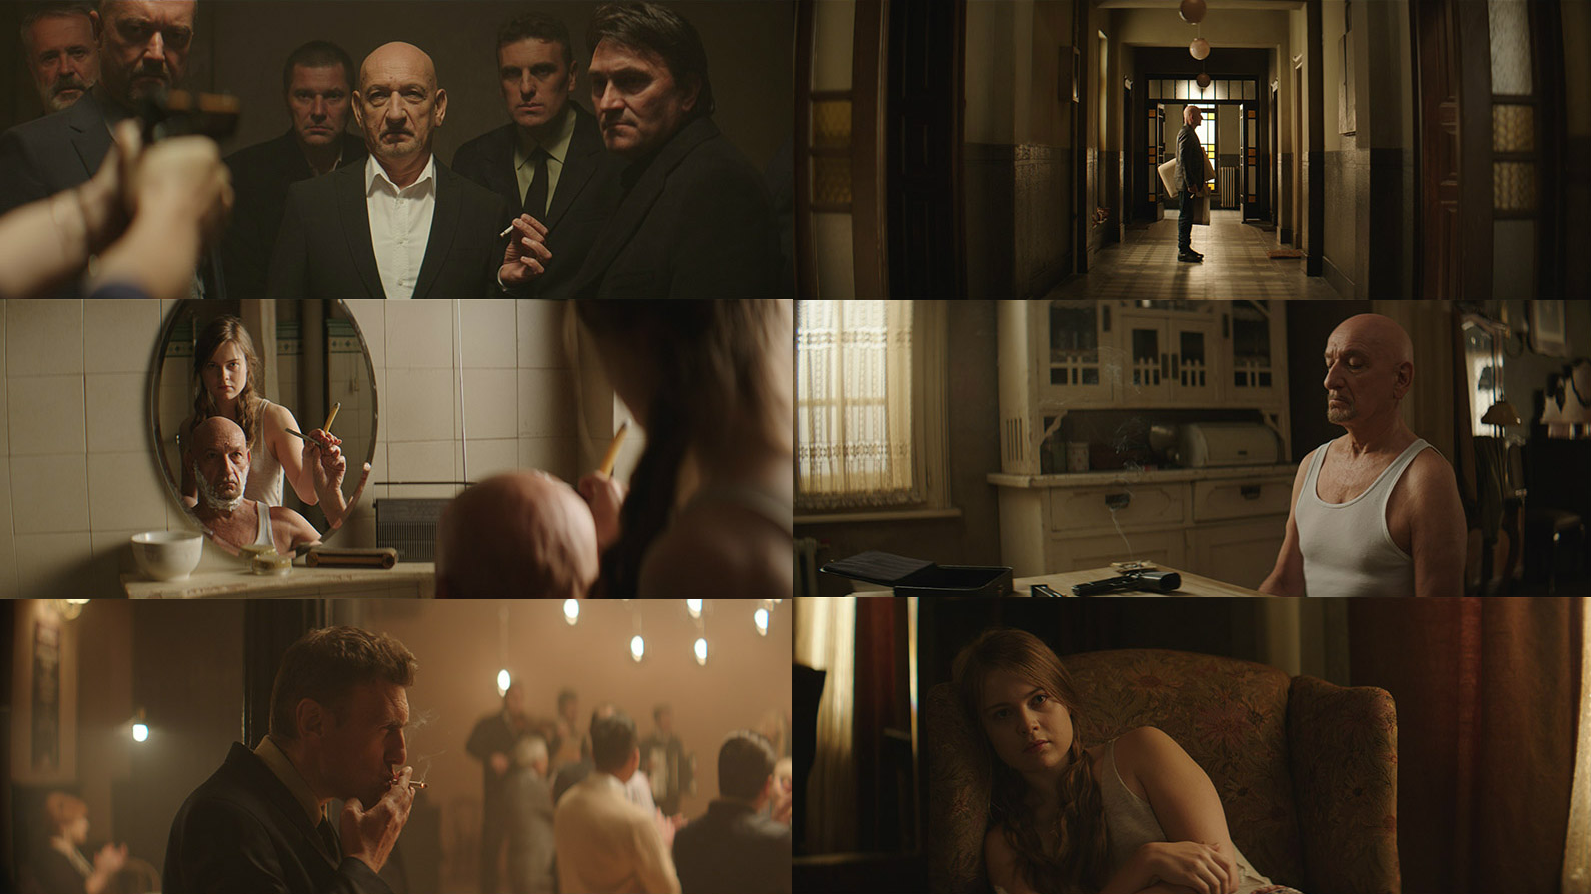 Production stills from An Ordinary Man directed by Brad Silberling - courtesy of Saben Films / Netflix